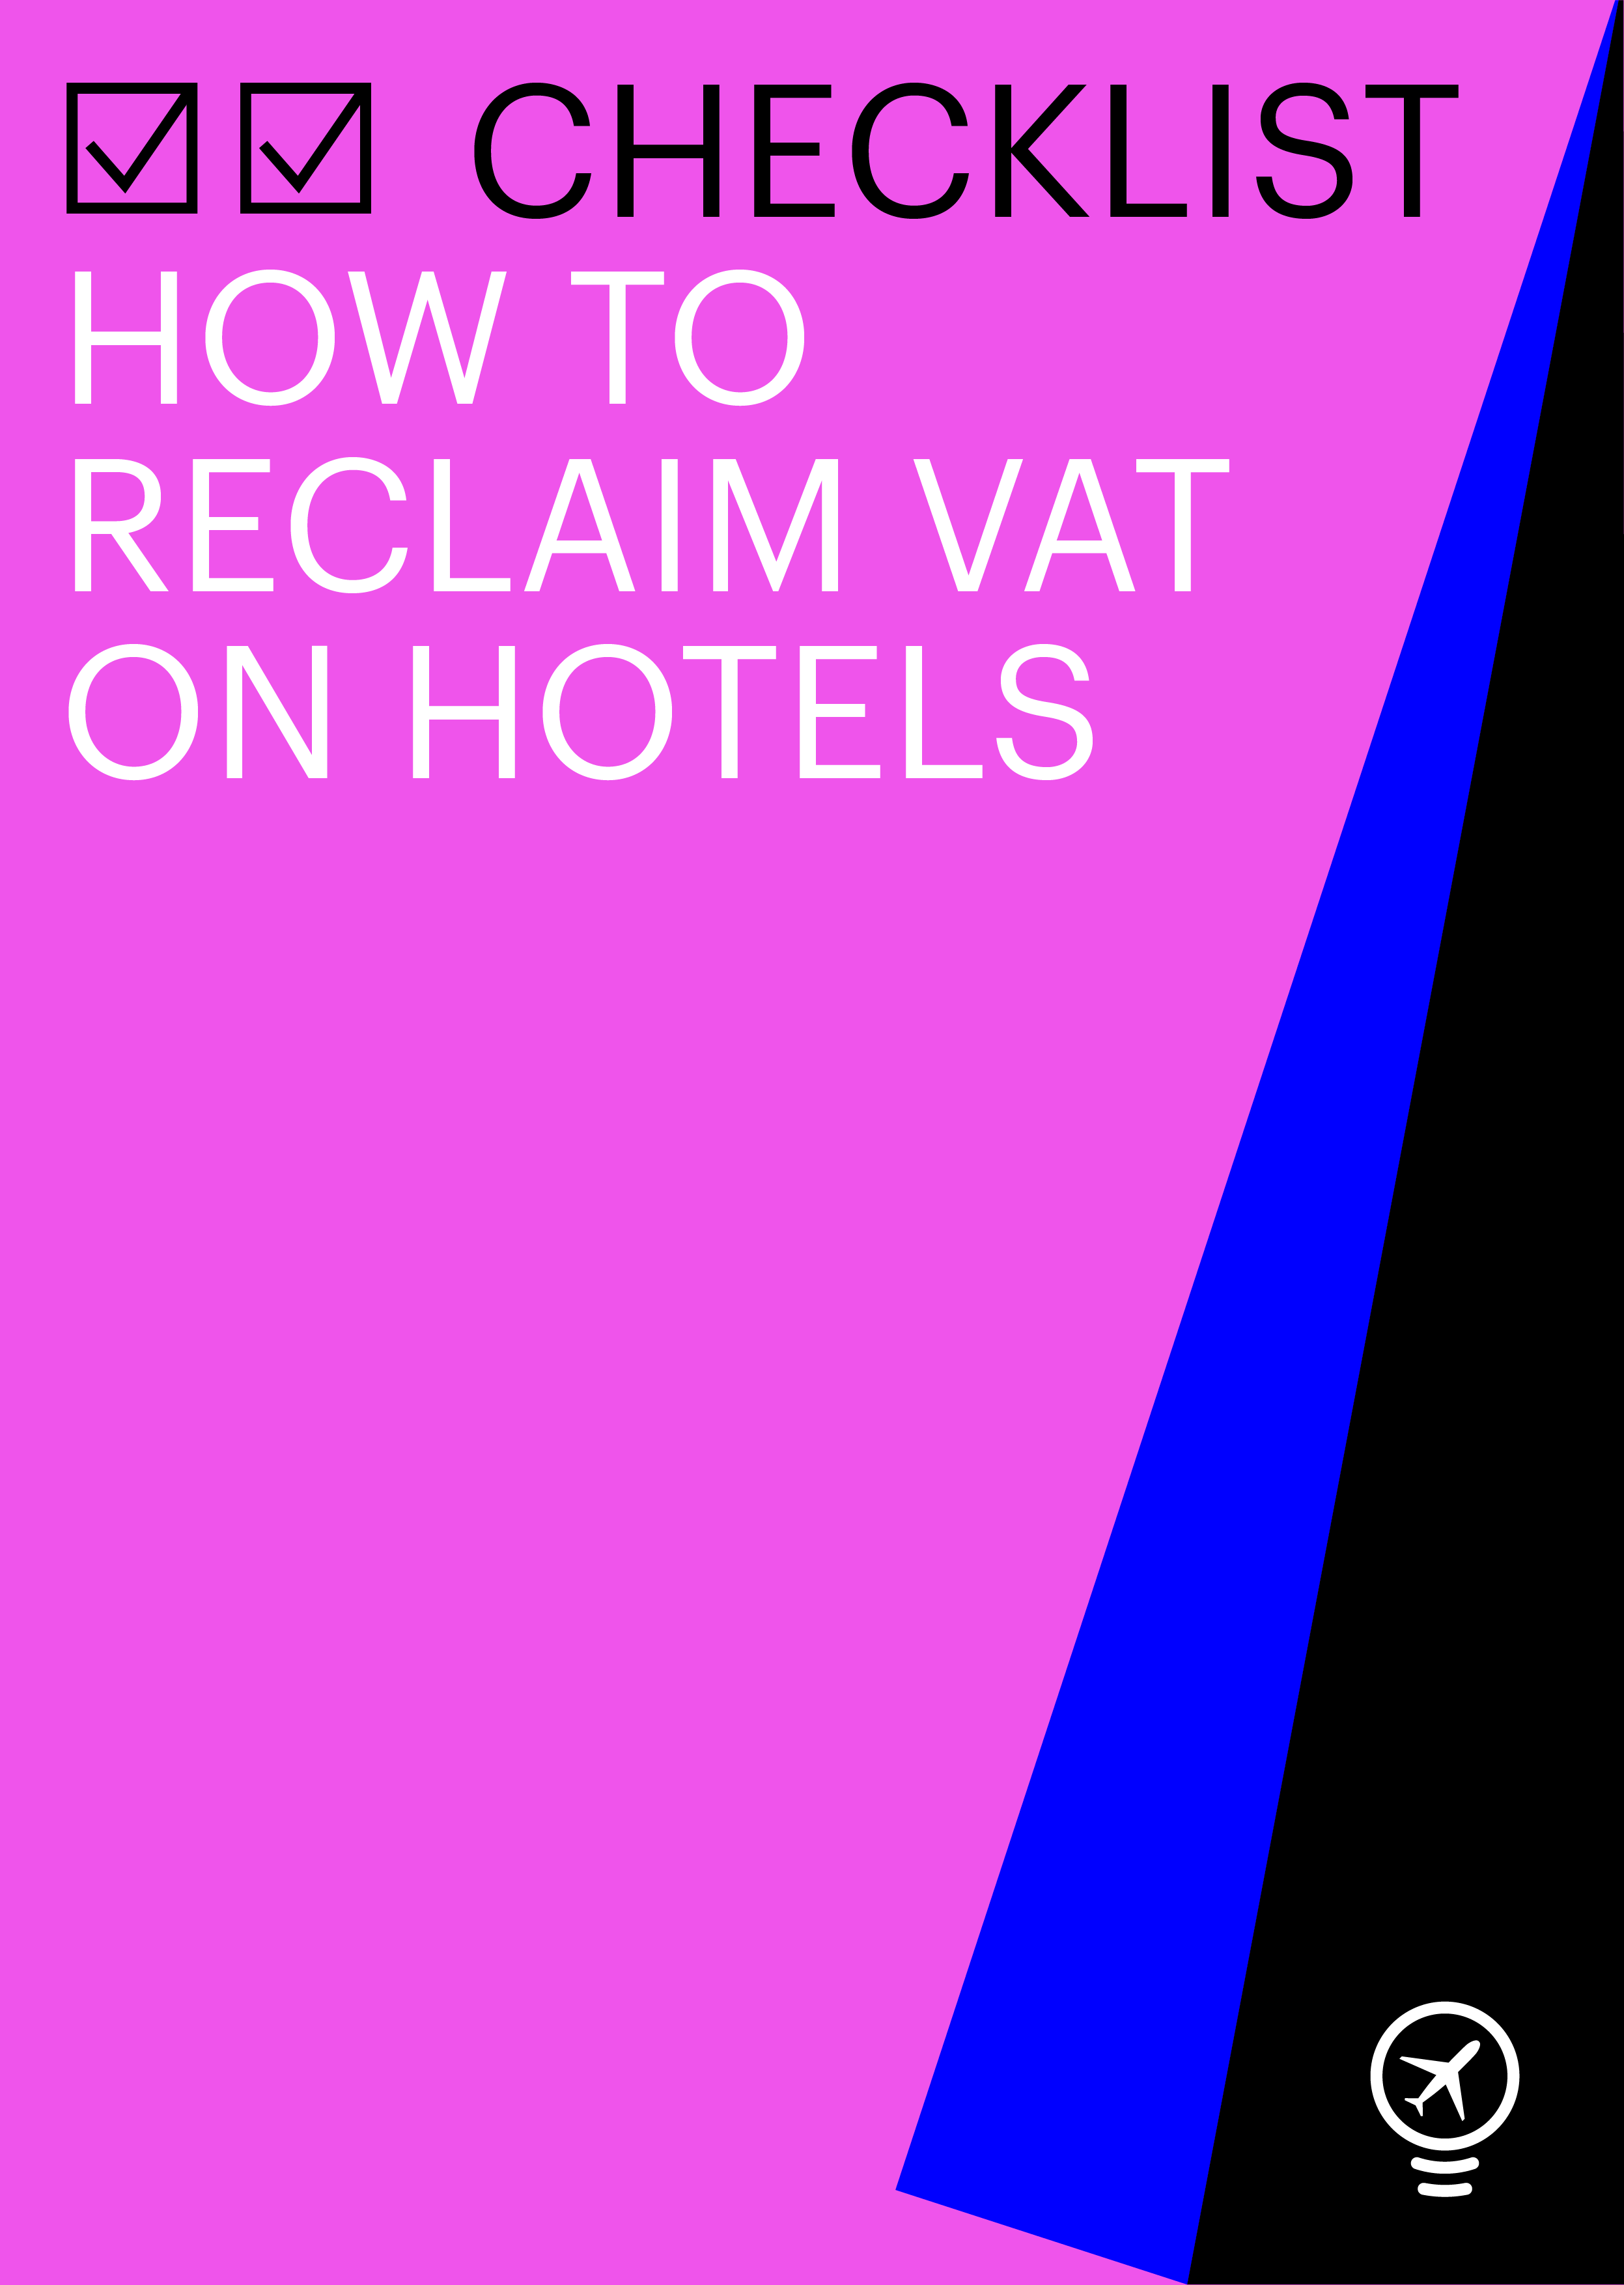 Checklist: How to reclaim VAT on hotels